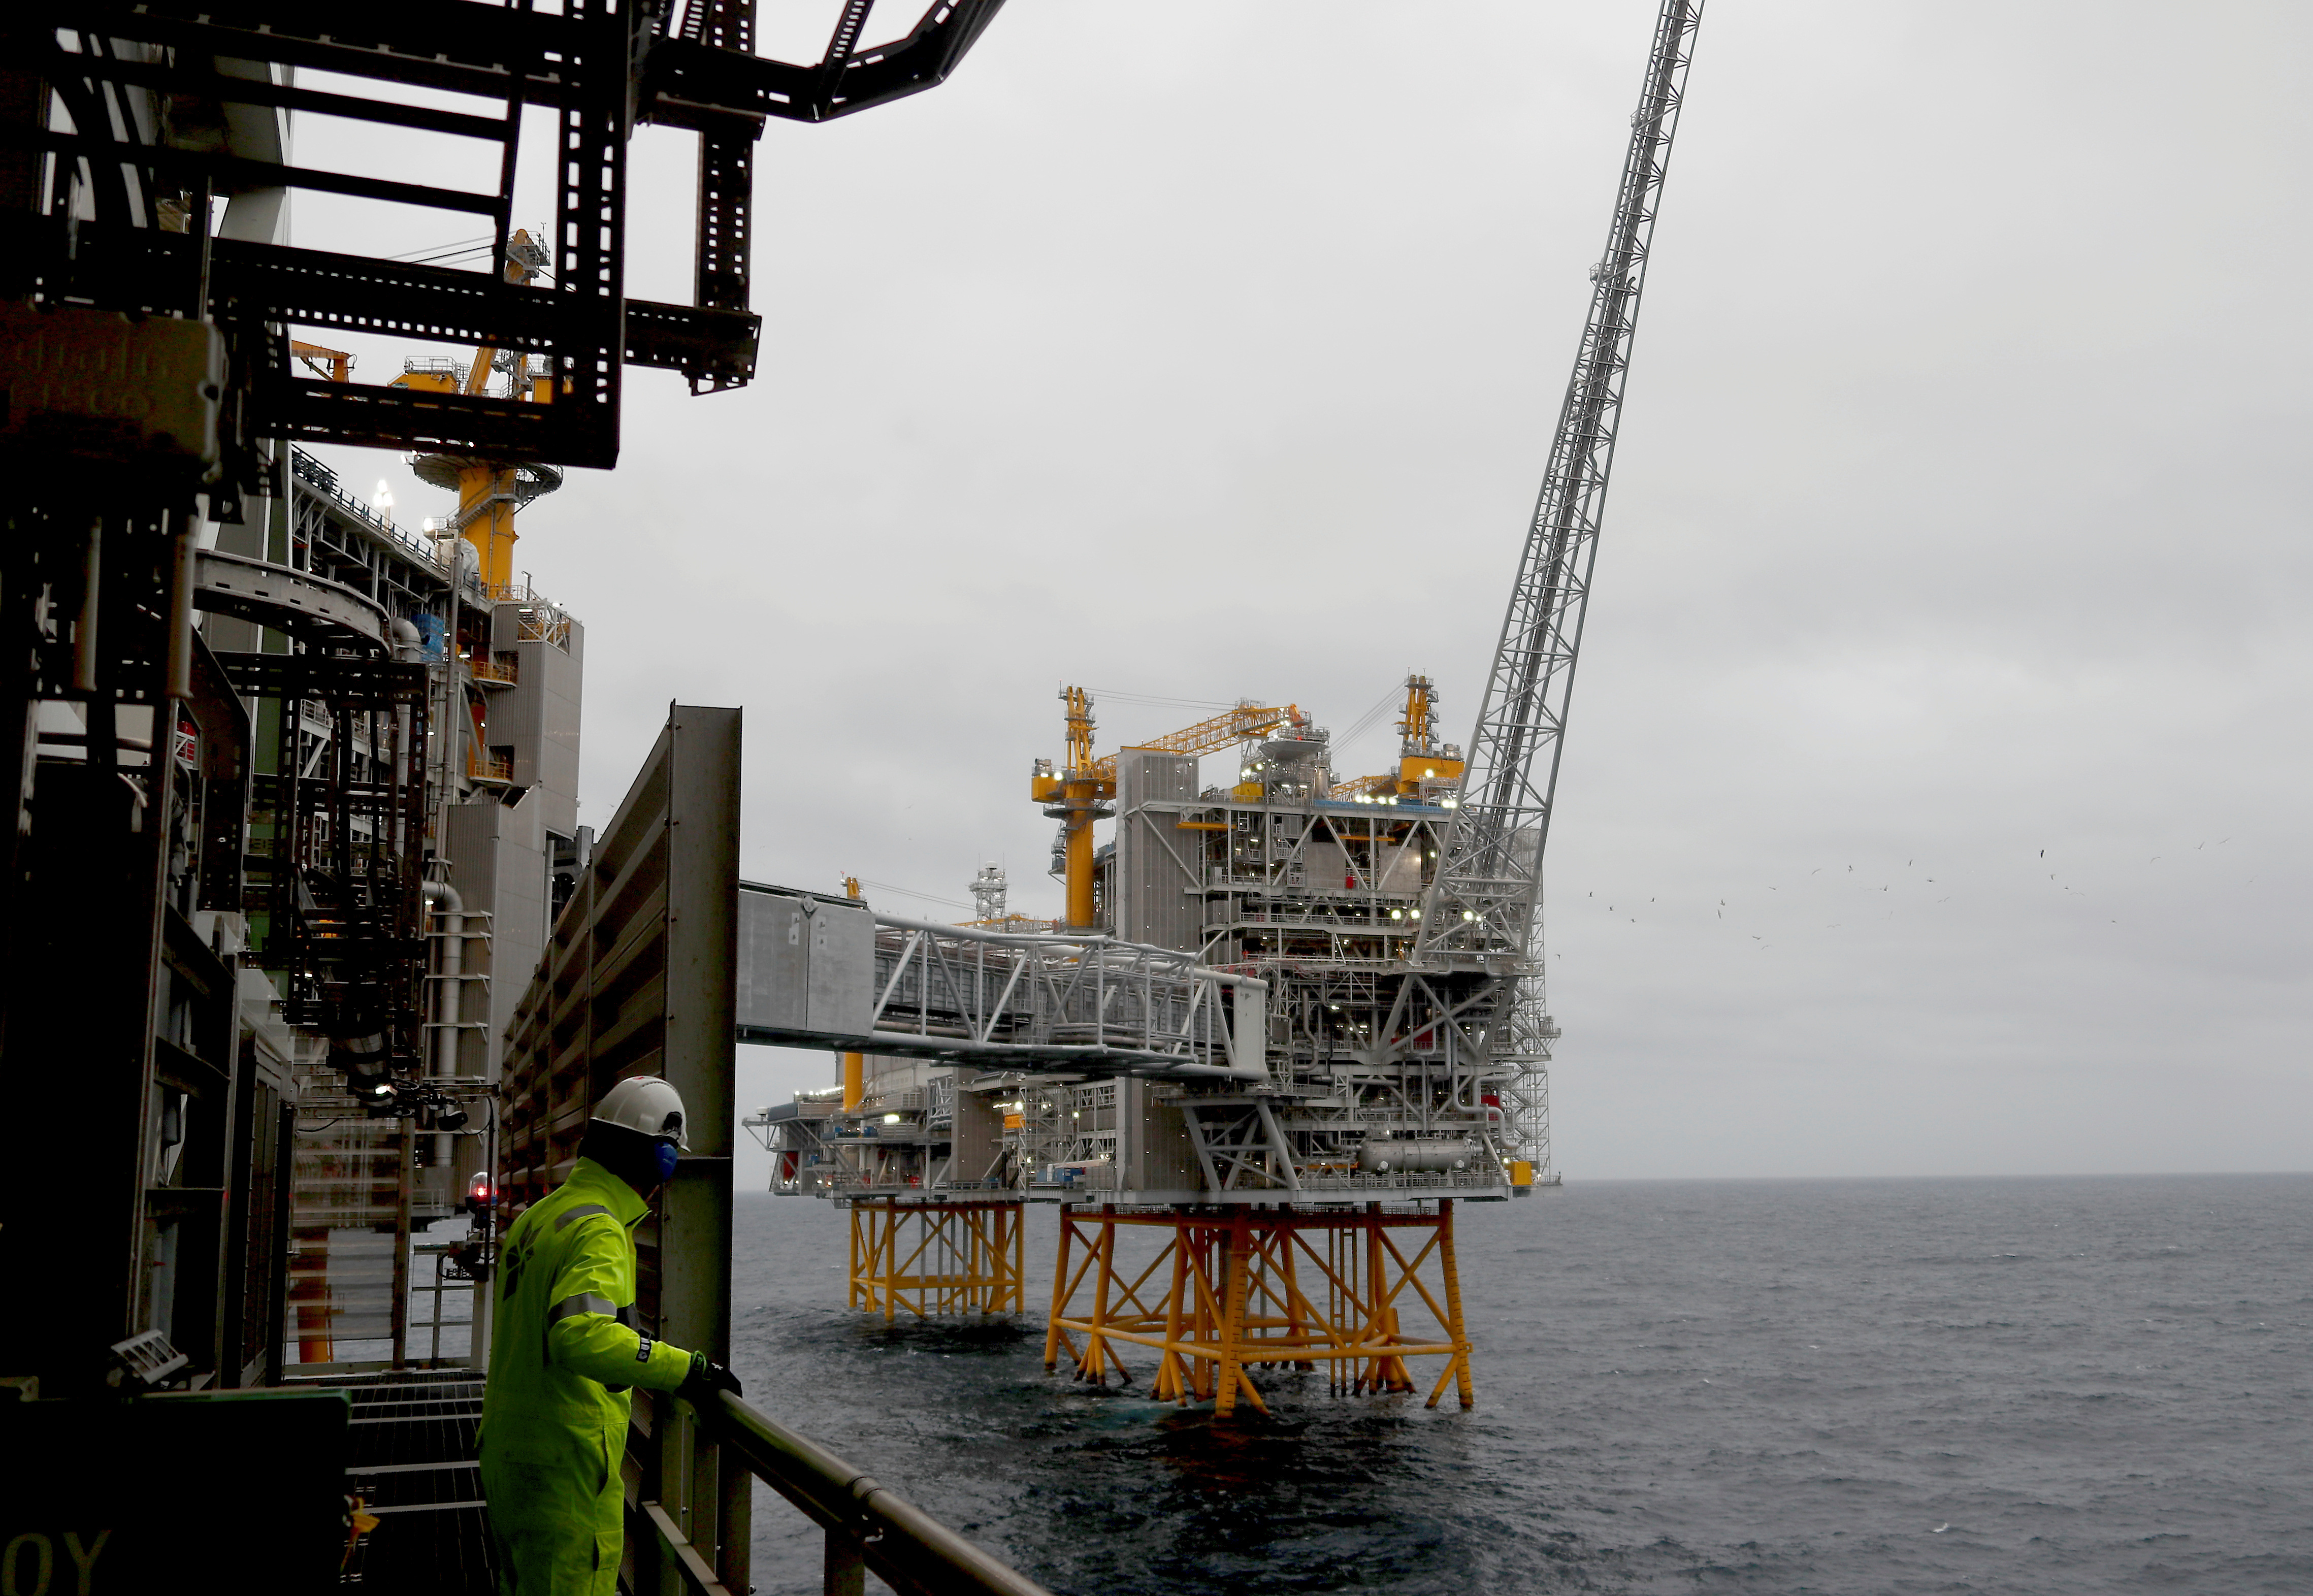 A general view of the Johan Sverdrup oilfield platforms in the North Sea